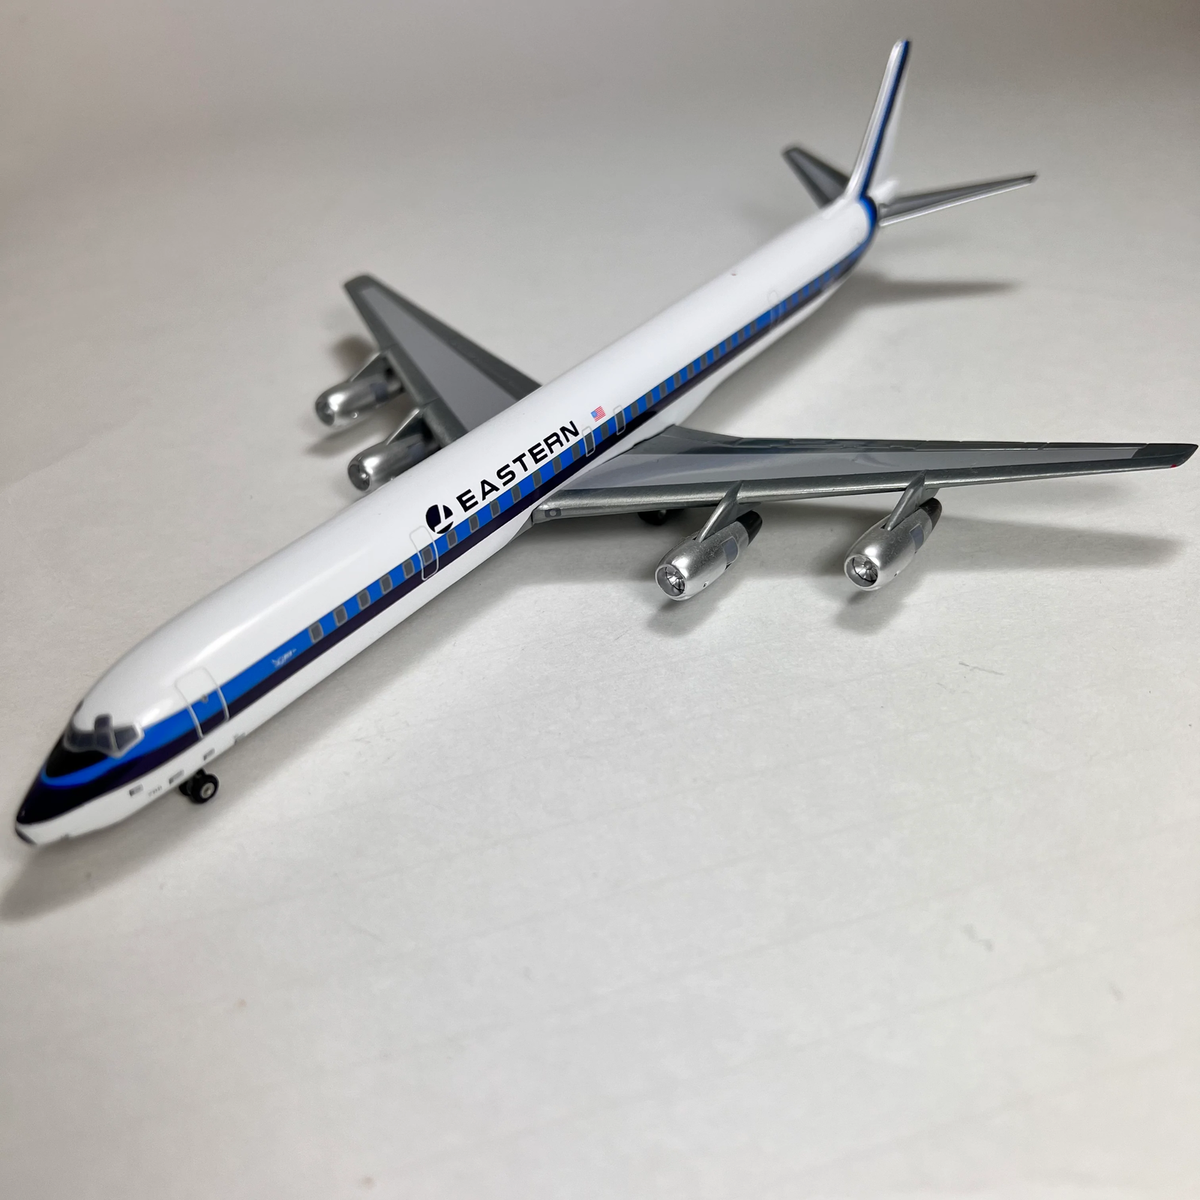 Eastern Airlines DC-8-61 N8768 Gemini Jets 1:250 – Airline